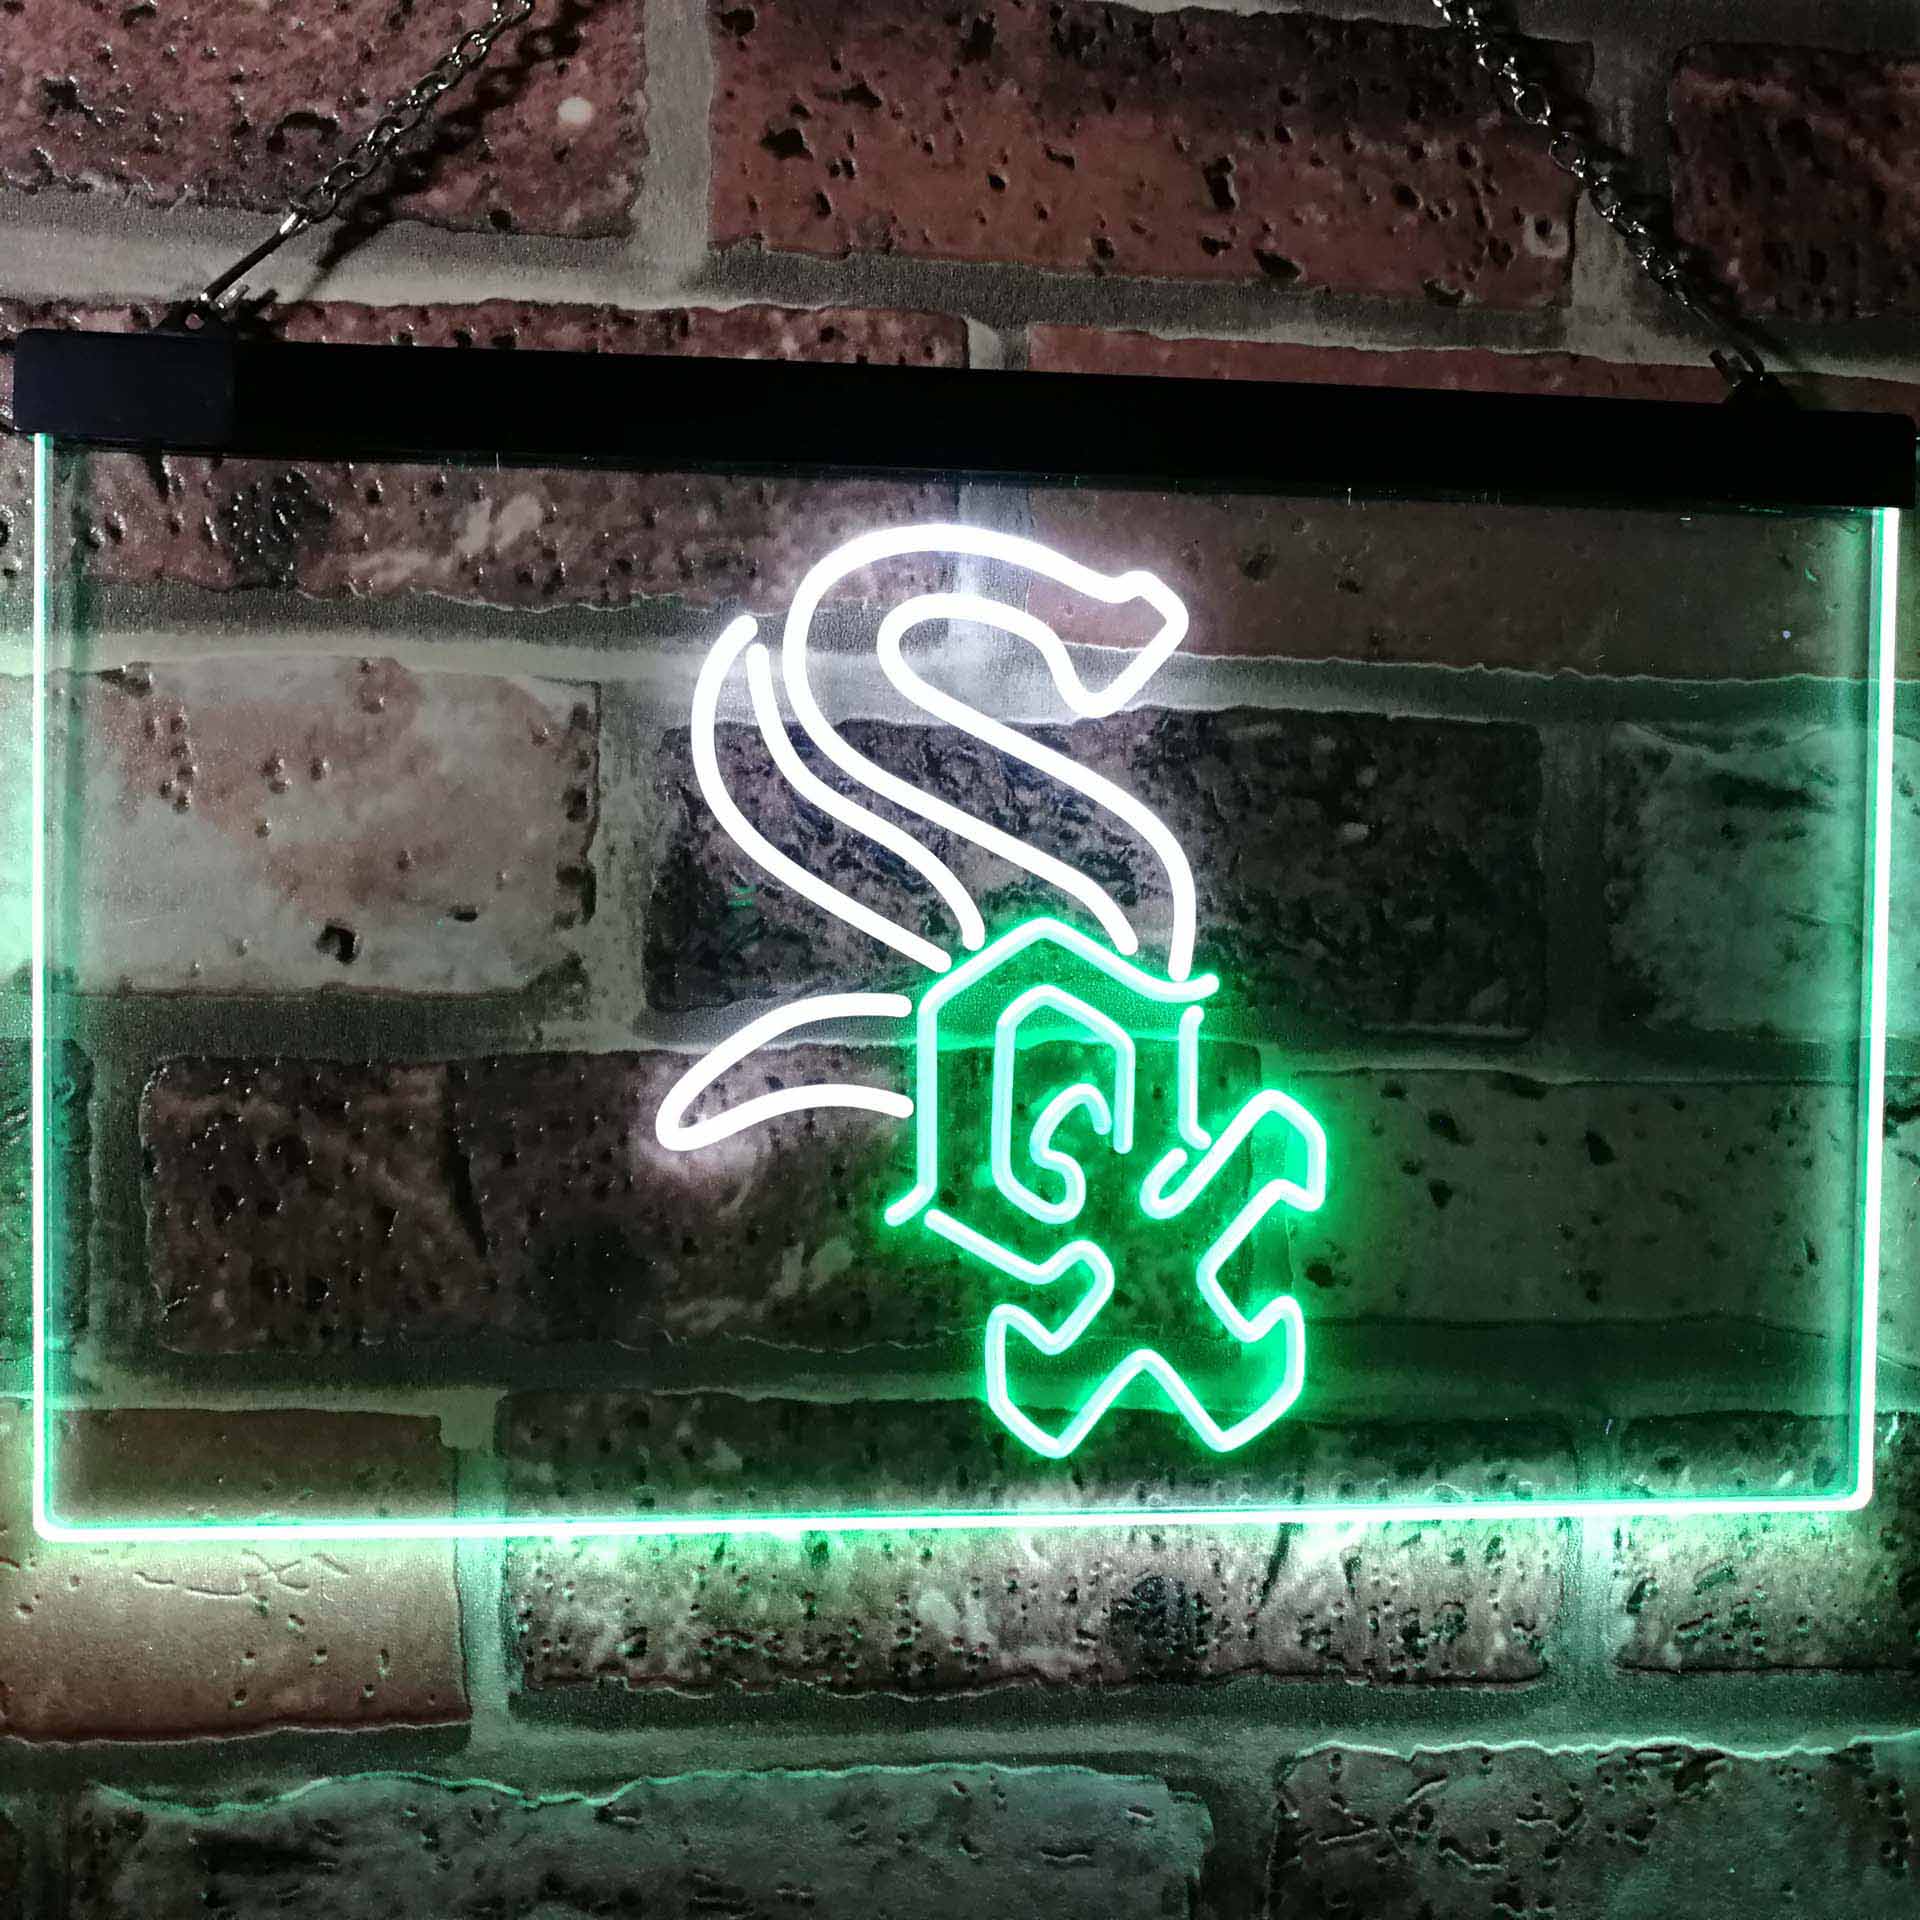 Chicago White Sox Dual Color LED Neon Sign ProLedSign